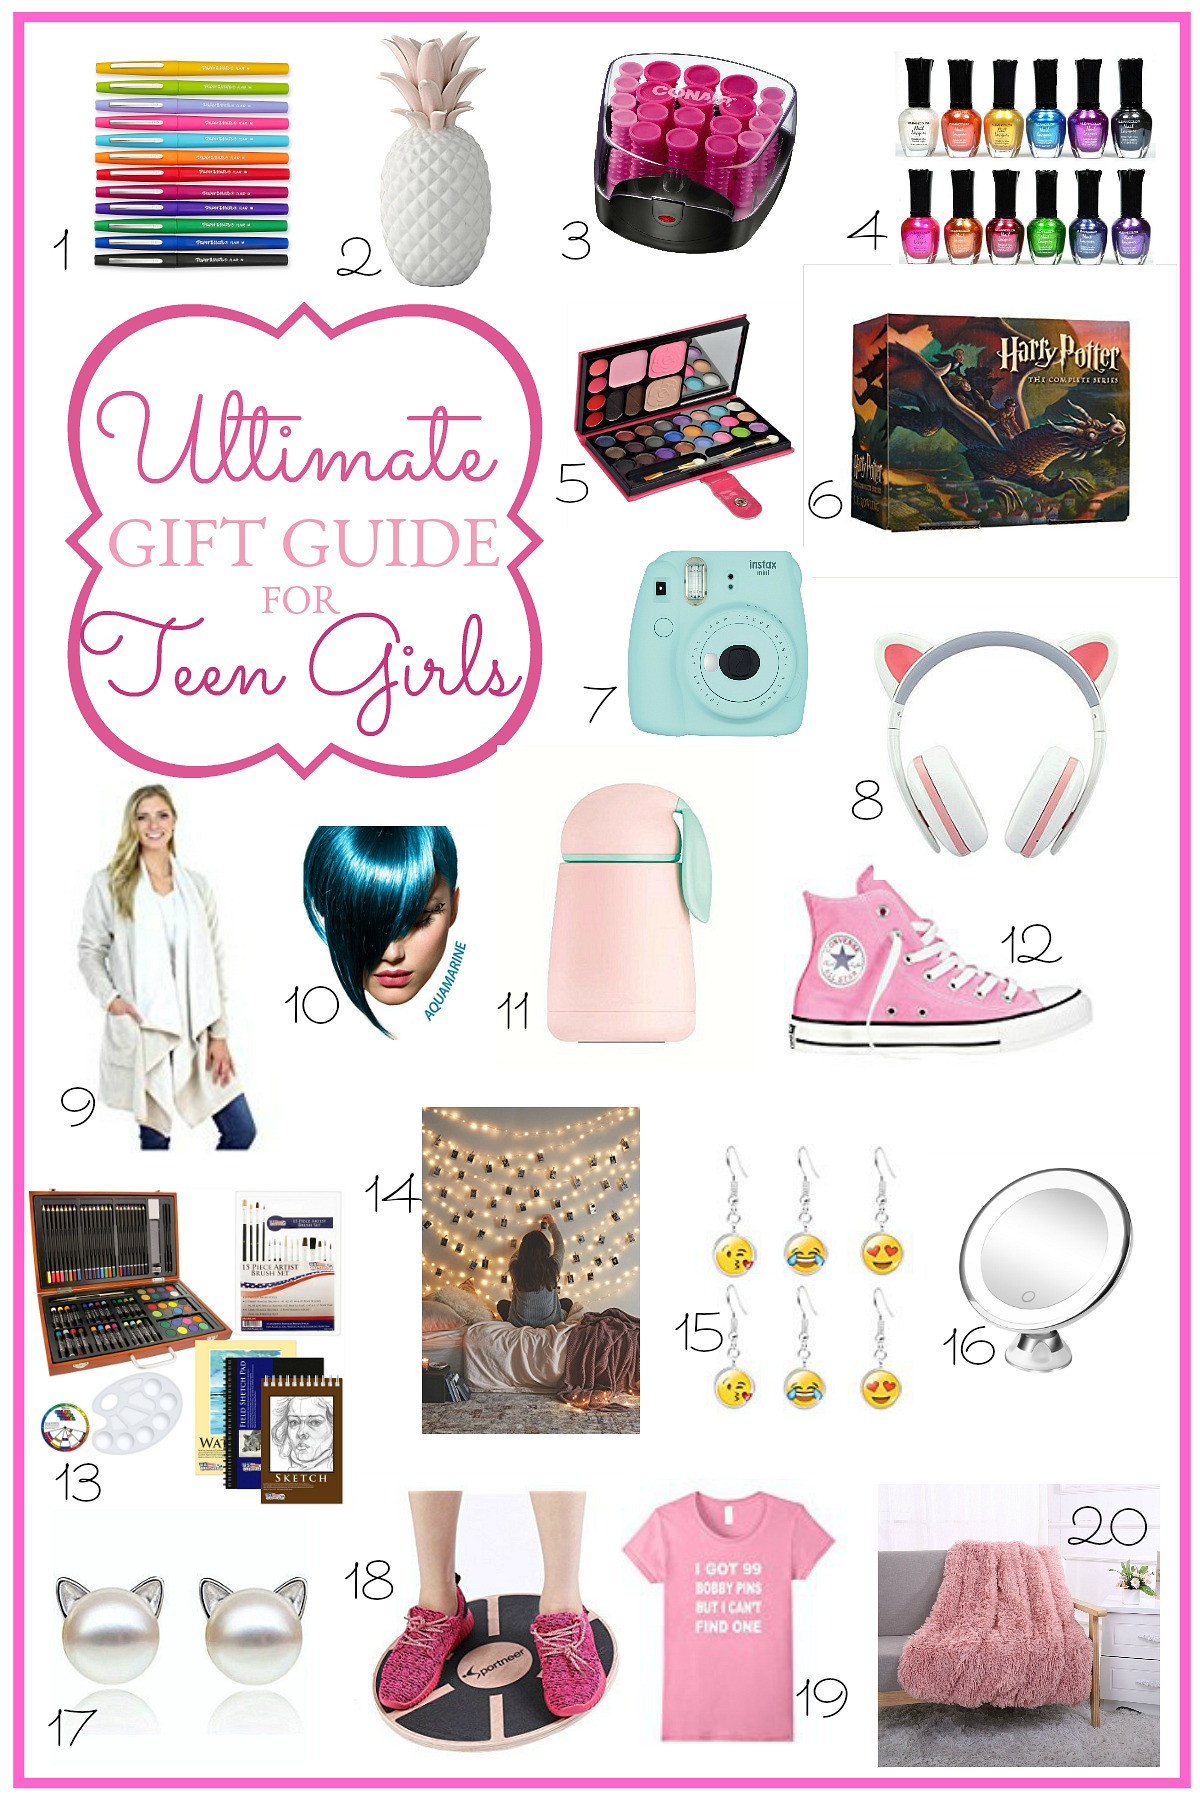 Gift Ideas For 12 Year Old Girls
 Ultimate Holiday Gift Guide for Teen Girls